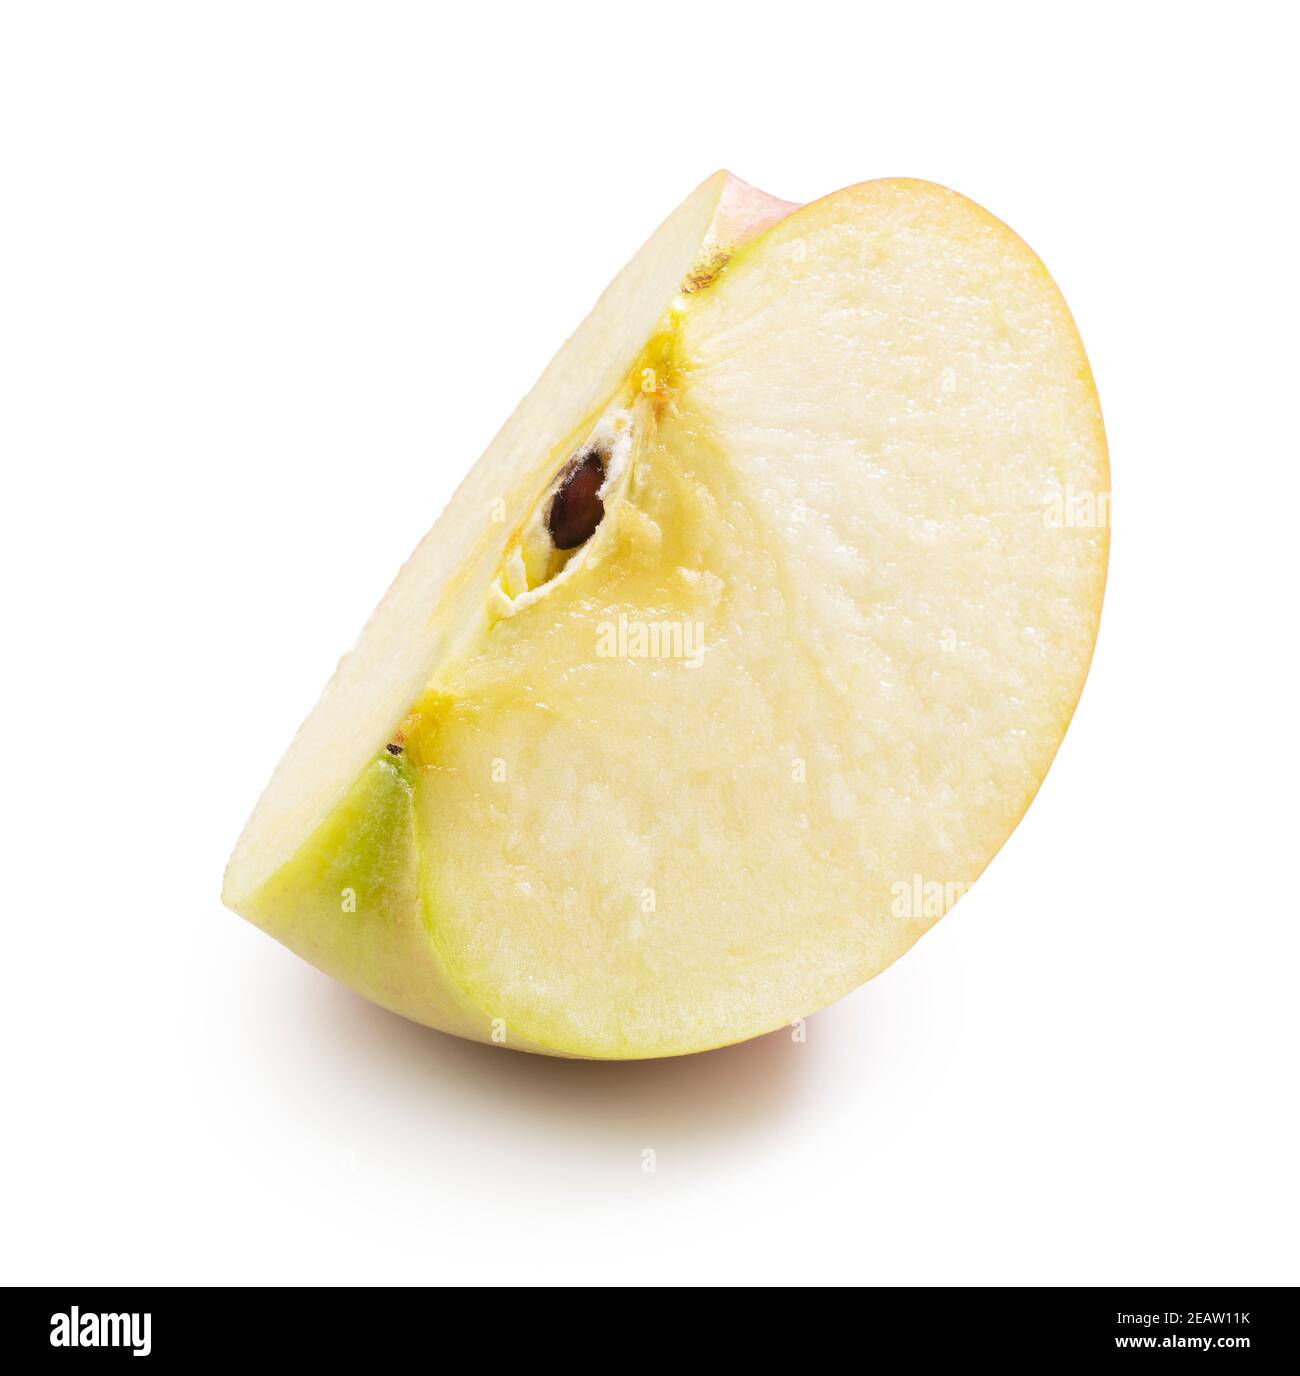 Cut apples on a white background Stock Photo